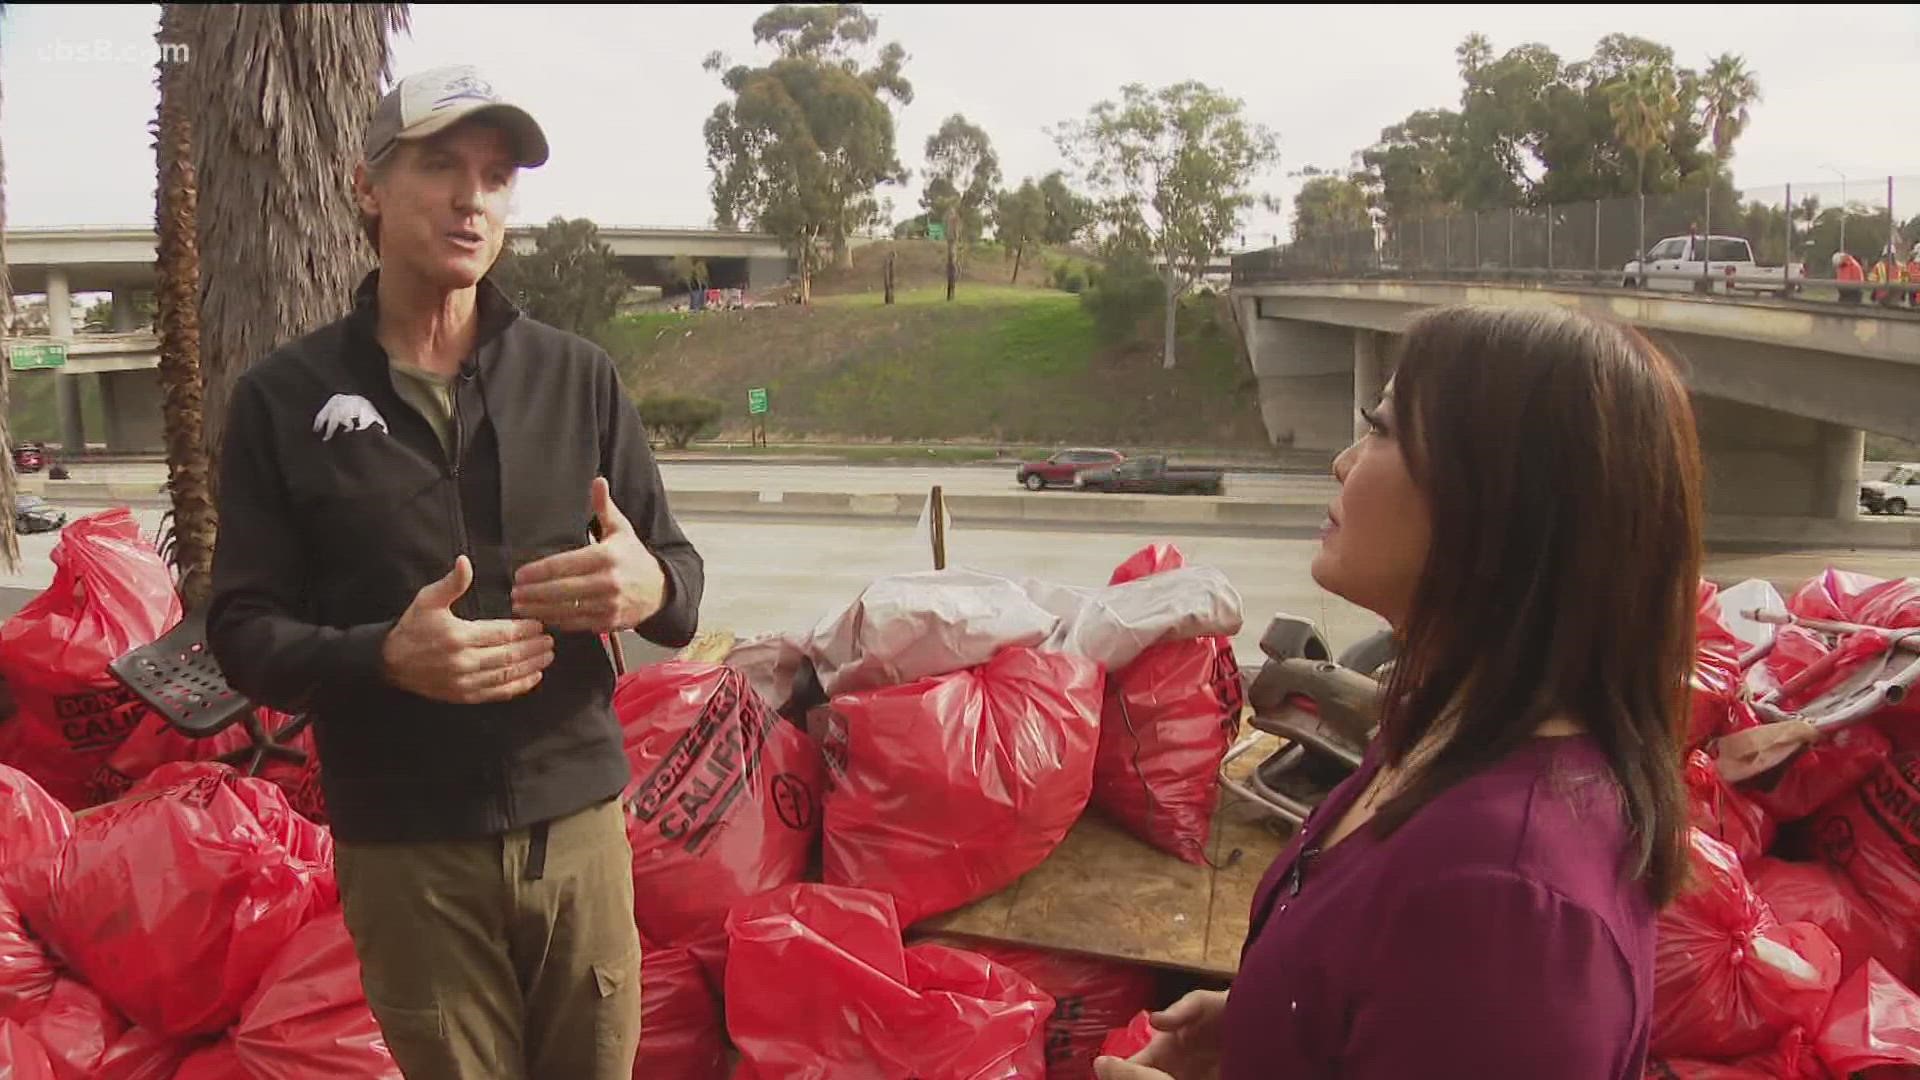 Following an appearance in San Diego cleaning up a homeless encampment, Gov. Newsom sat down with CBS 8 to talk about homelessness and other issues in California.